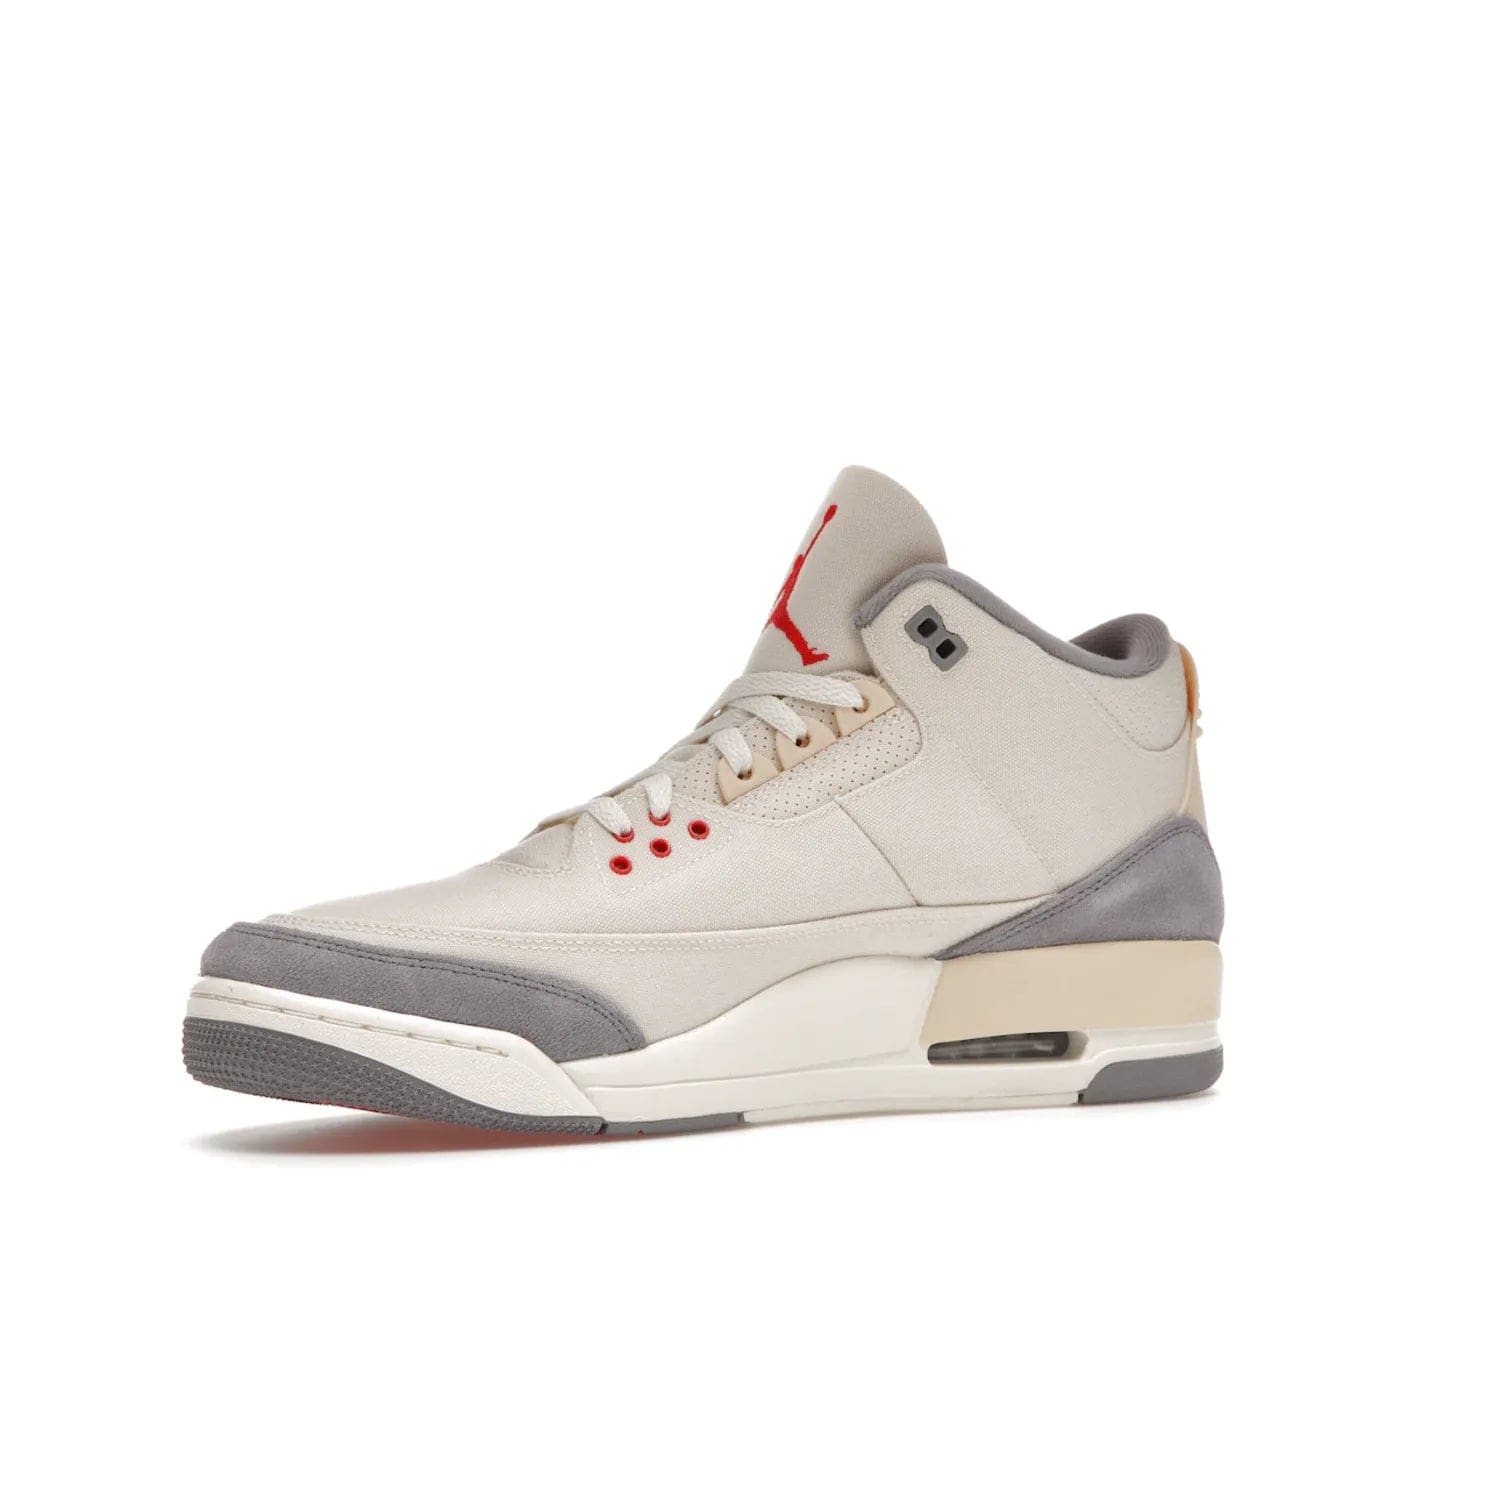 Jordan 3 Retro Muslin - Image 16 - Only at www.BallersClubKickz.com - Eye-catching Air Jordan 3 Retro Muslin in a neutral palette of grey, cream, and red. Featuring canvas upper, suede overlays and white/grey Air Max sole. Available in March 2022.